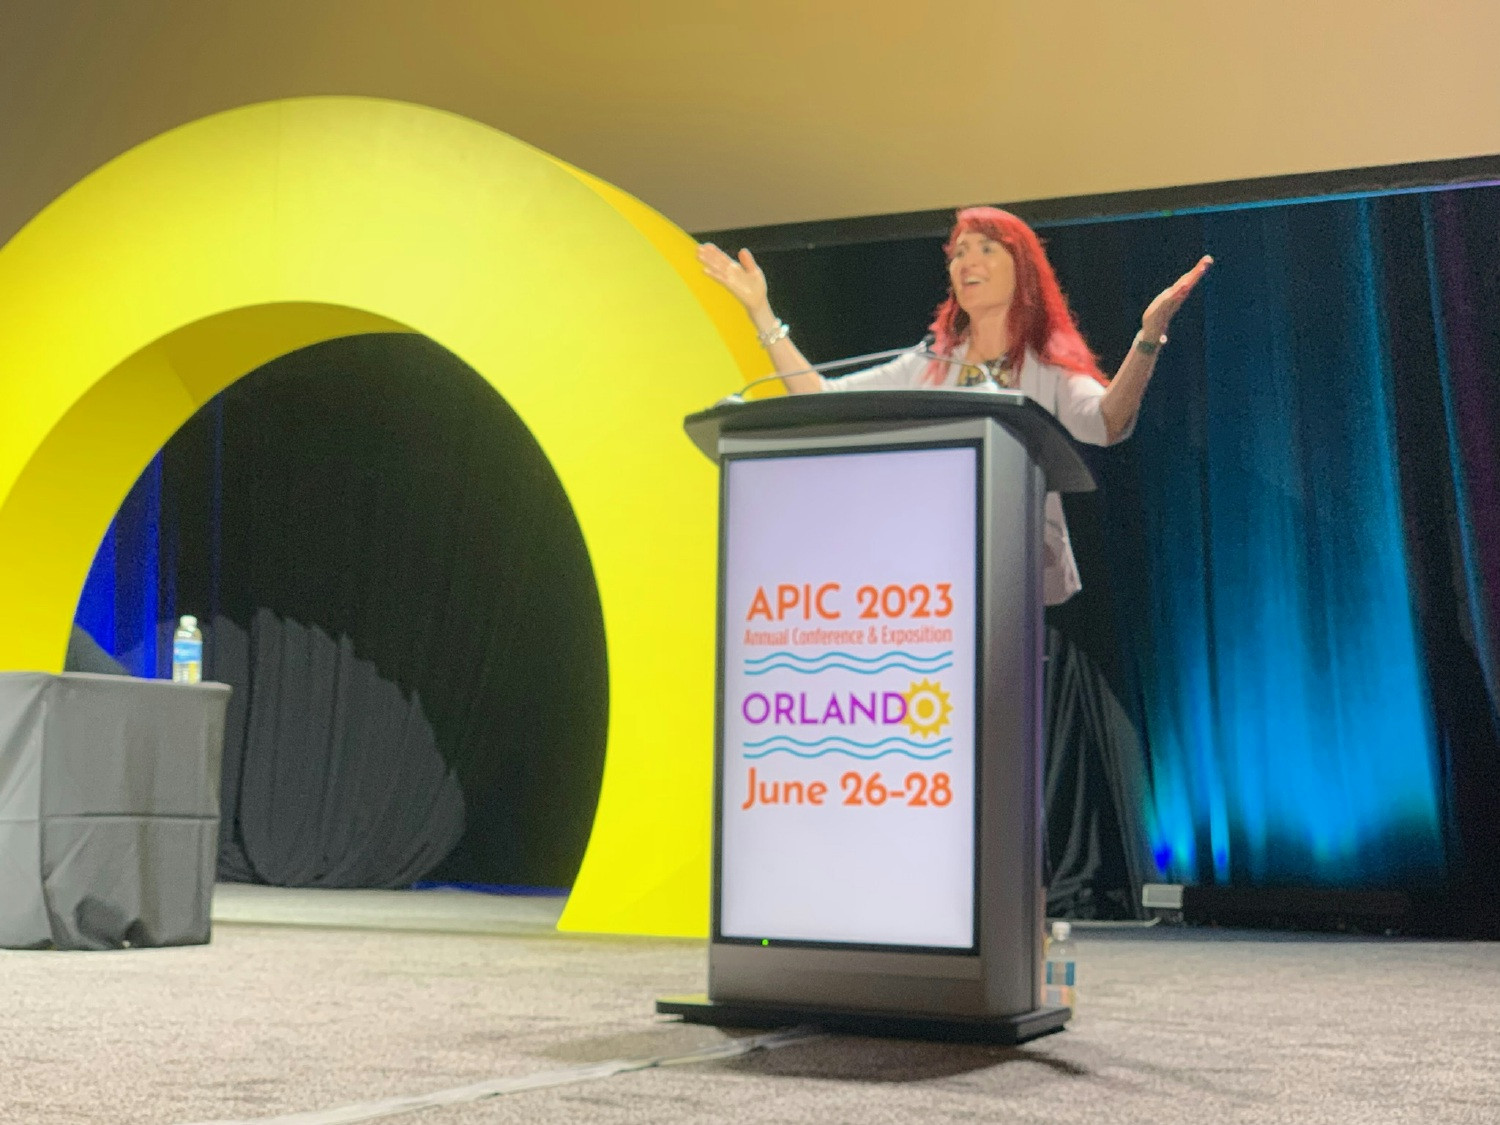 2023 APIC Consulting - VP of Business Development, Kathryn Hitchcock presenting at the APIC Annual Conference 